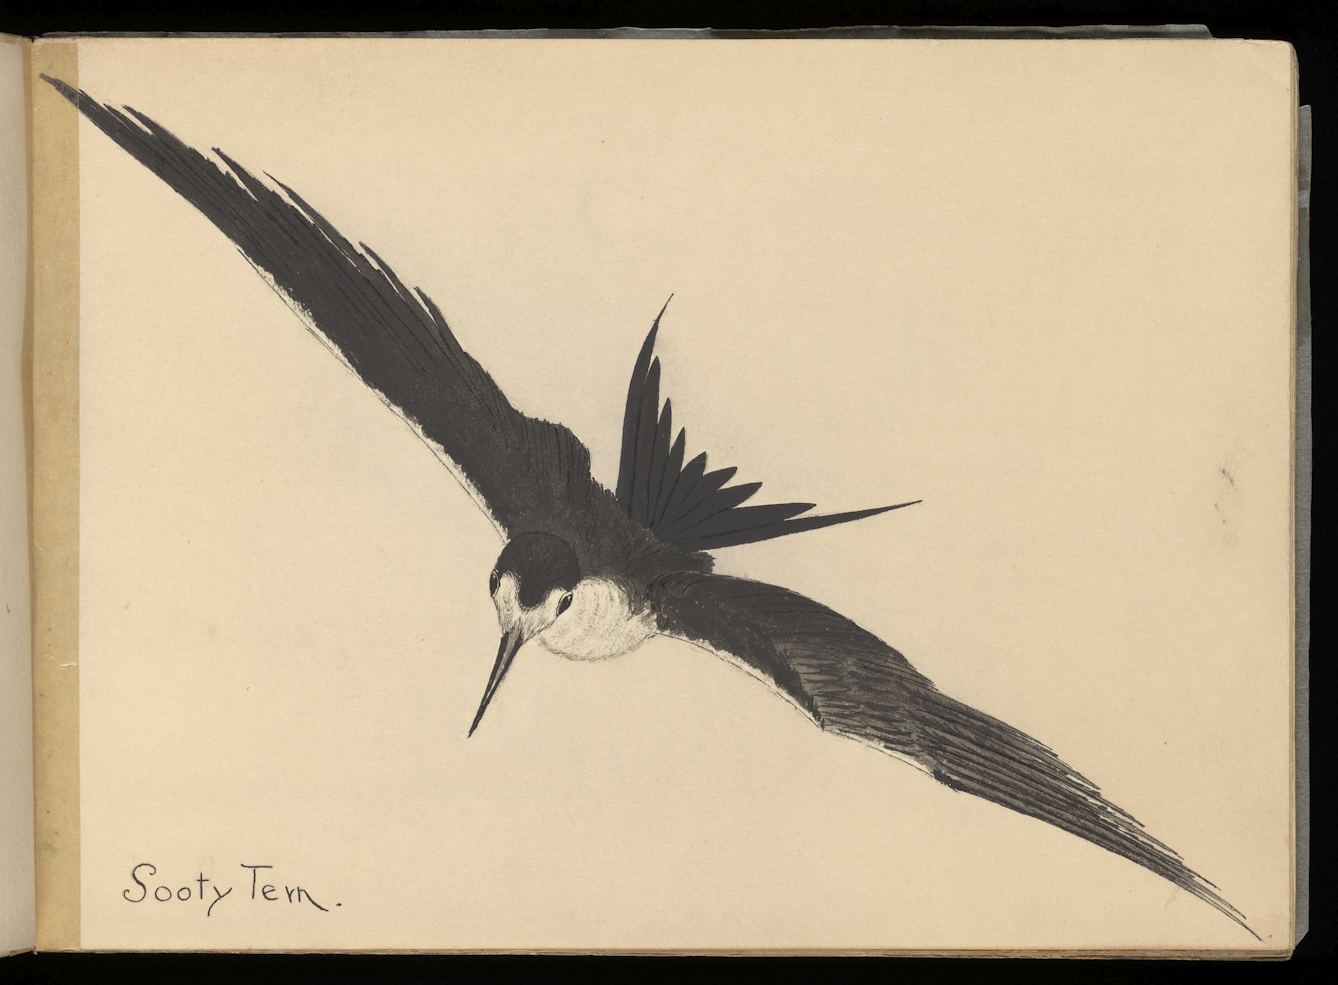 Photograph of a page from a handwritten and illustrated book, titled 'Twelve British birds. Drawn from the Collection of Mr. E. T. Booth at Brighton, Sussex. September 1917'. The image shows a watercolour painting of a bird in flight, wings outstretched, with a black black, wings, and back of head and white face and underbelly. The water-colour is titled by hand with, 'Sooty Tern'.